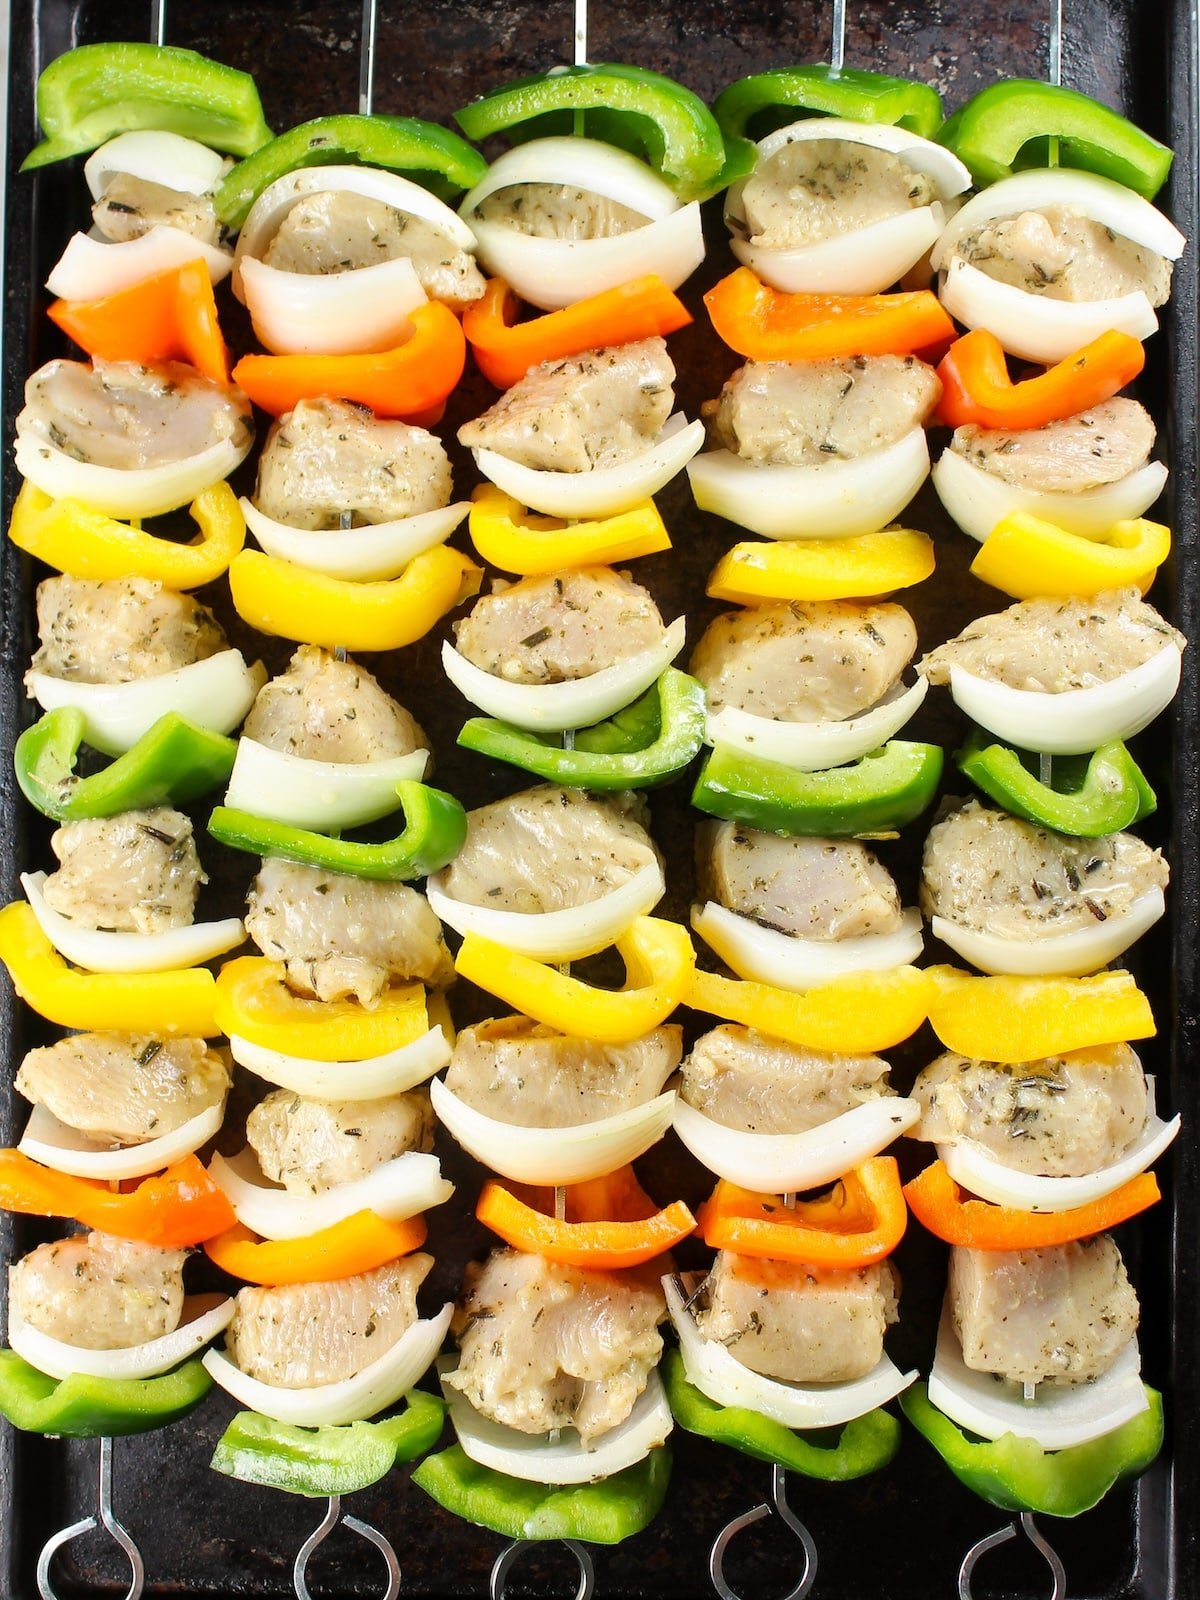 Raw chicken Kabobs skewered on baking sheet ready to cook.